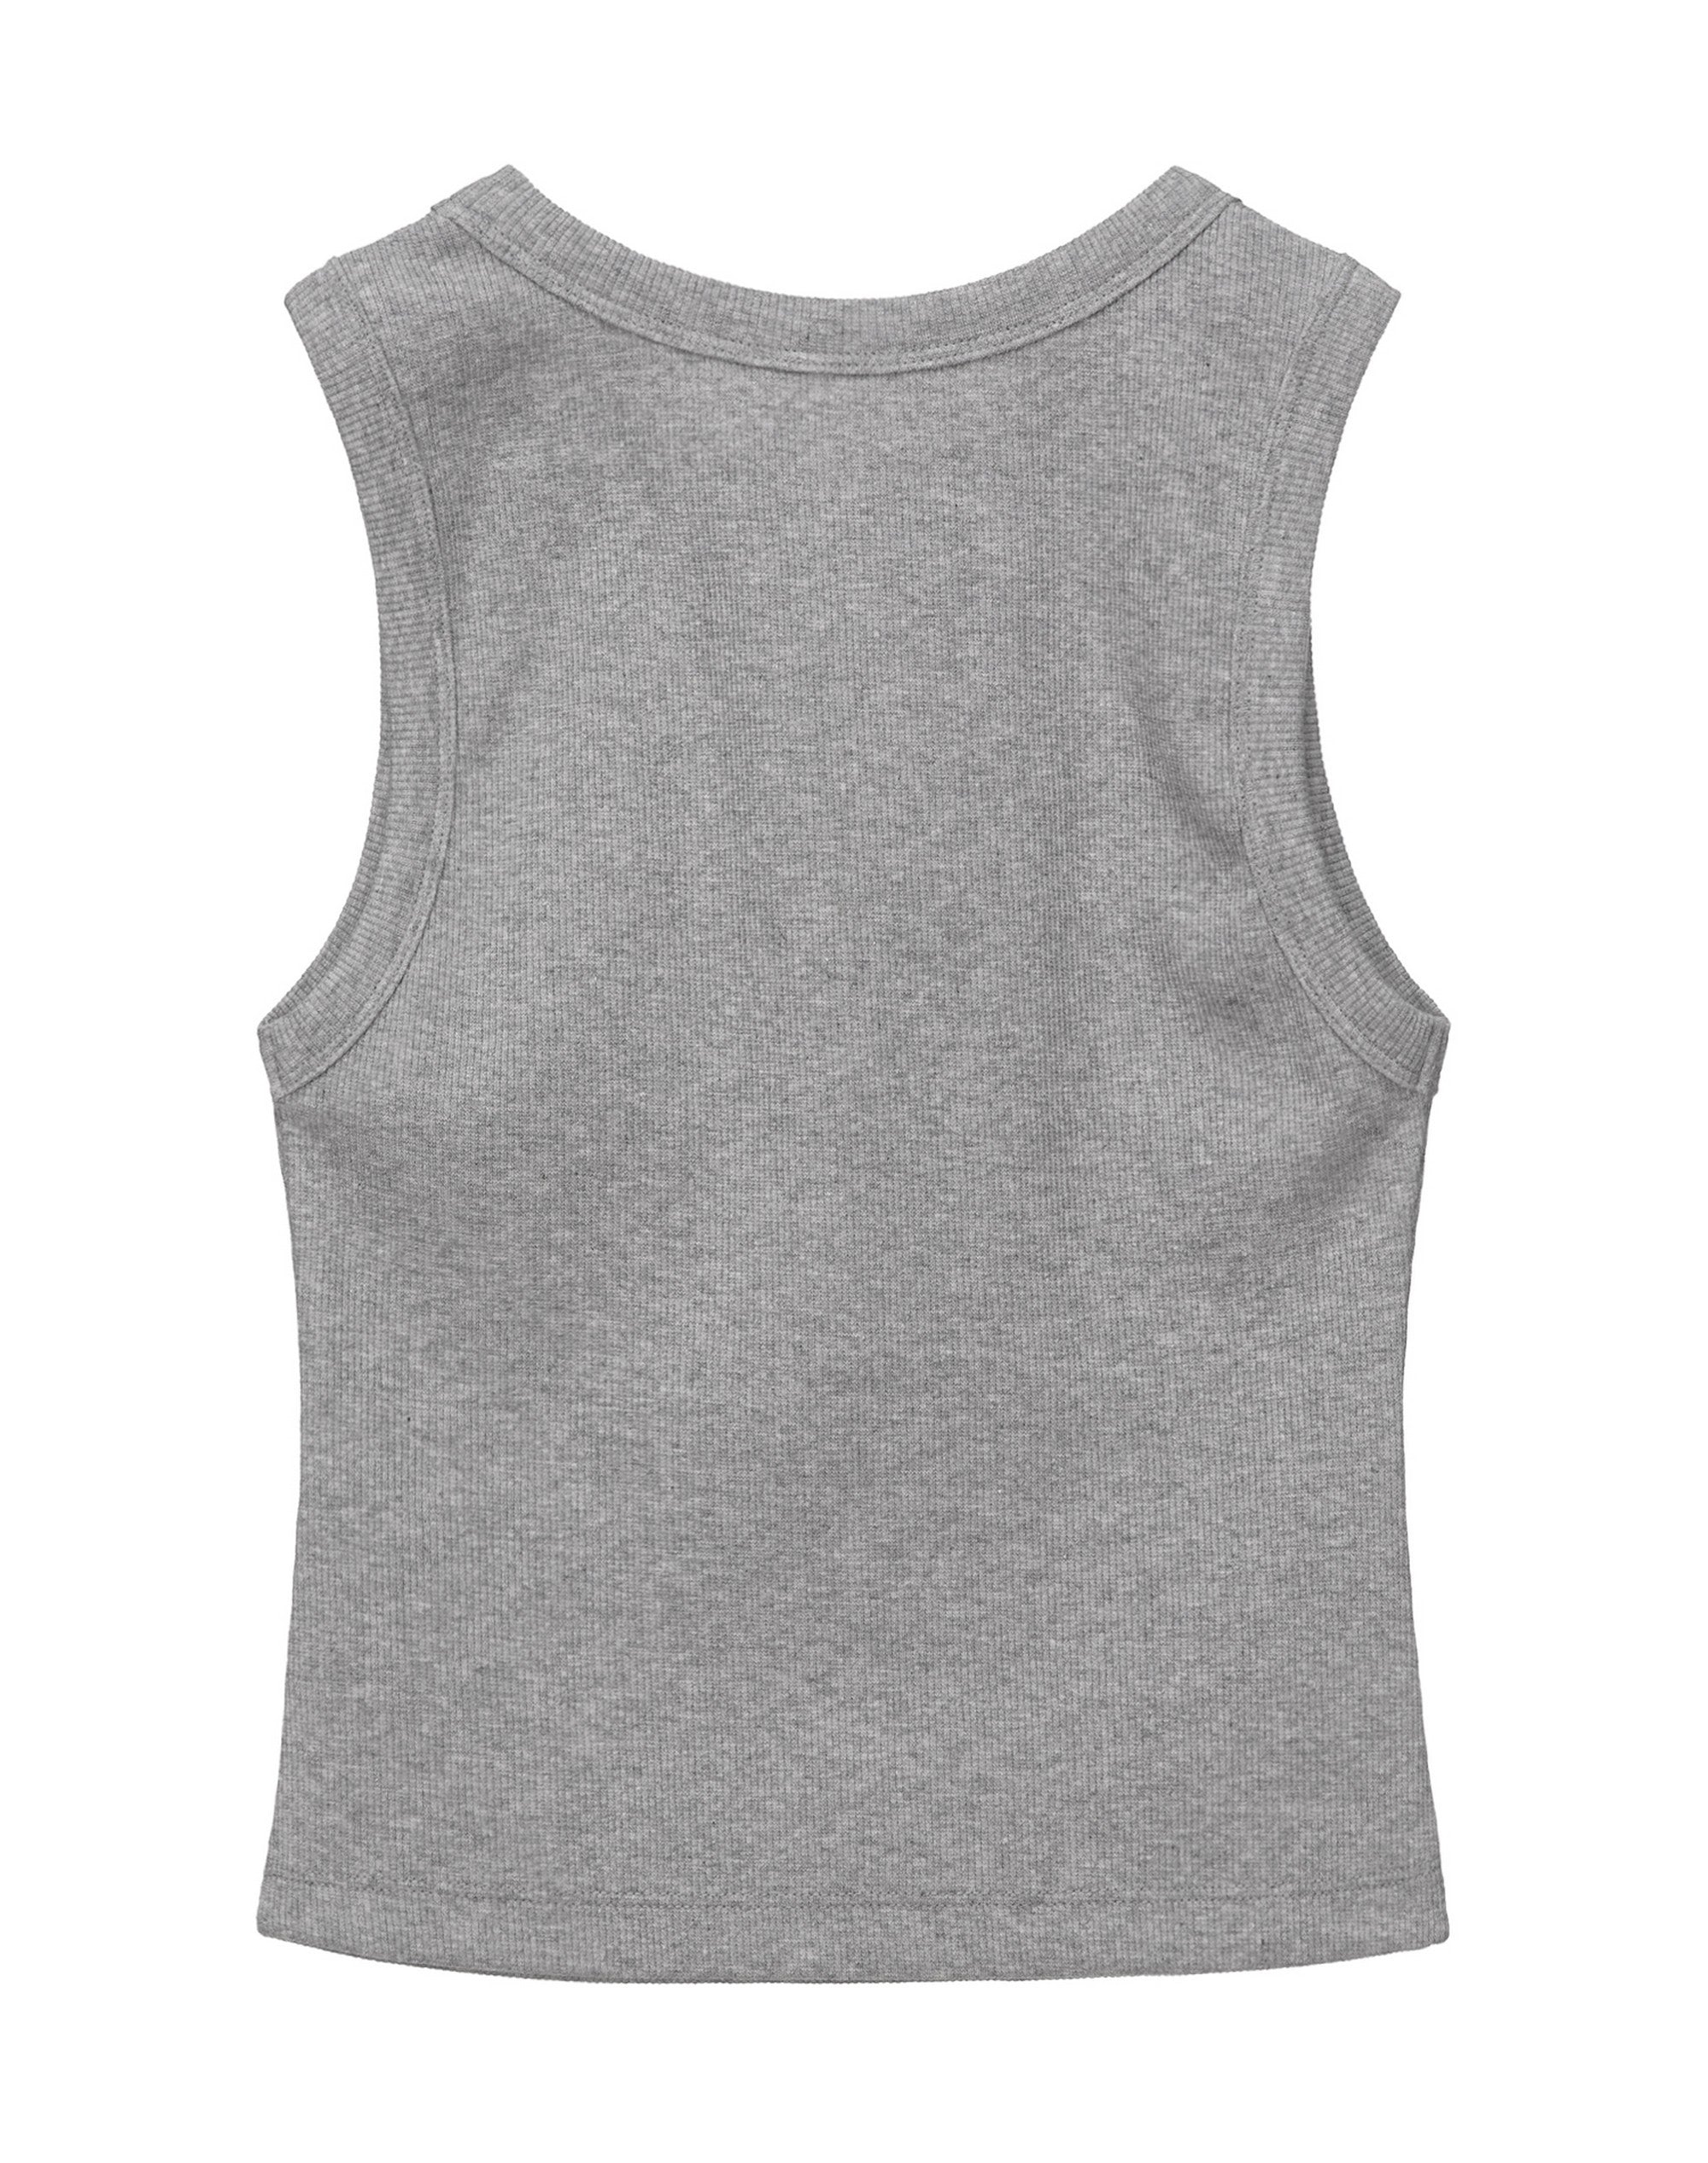 ESSENTIAL CROPPED TANK TOP